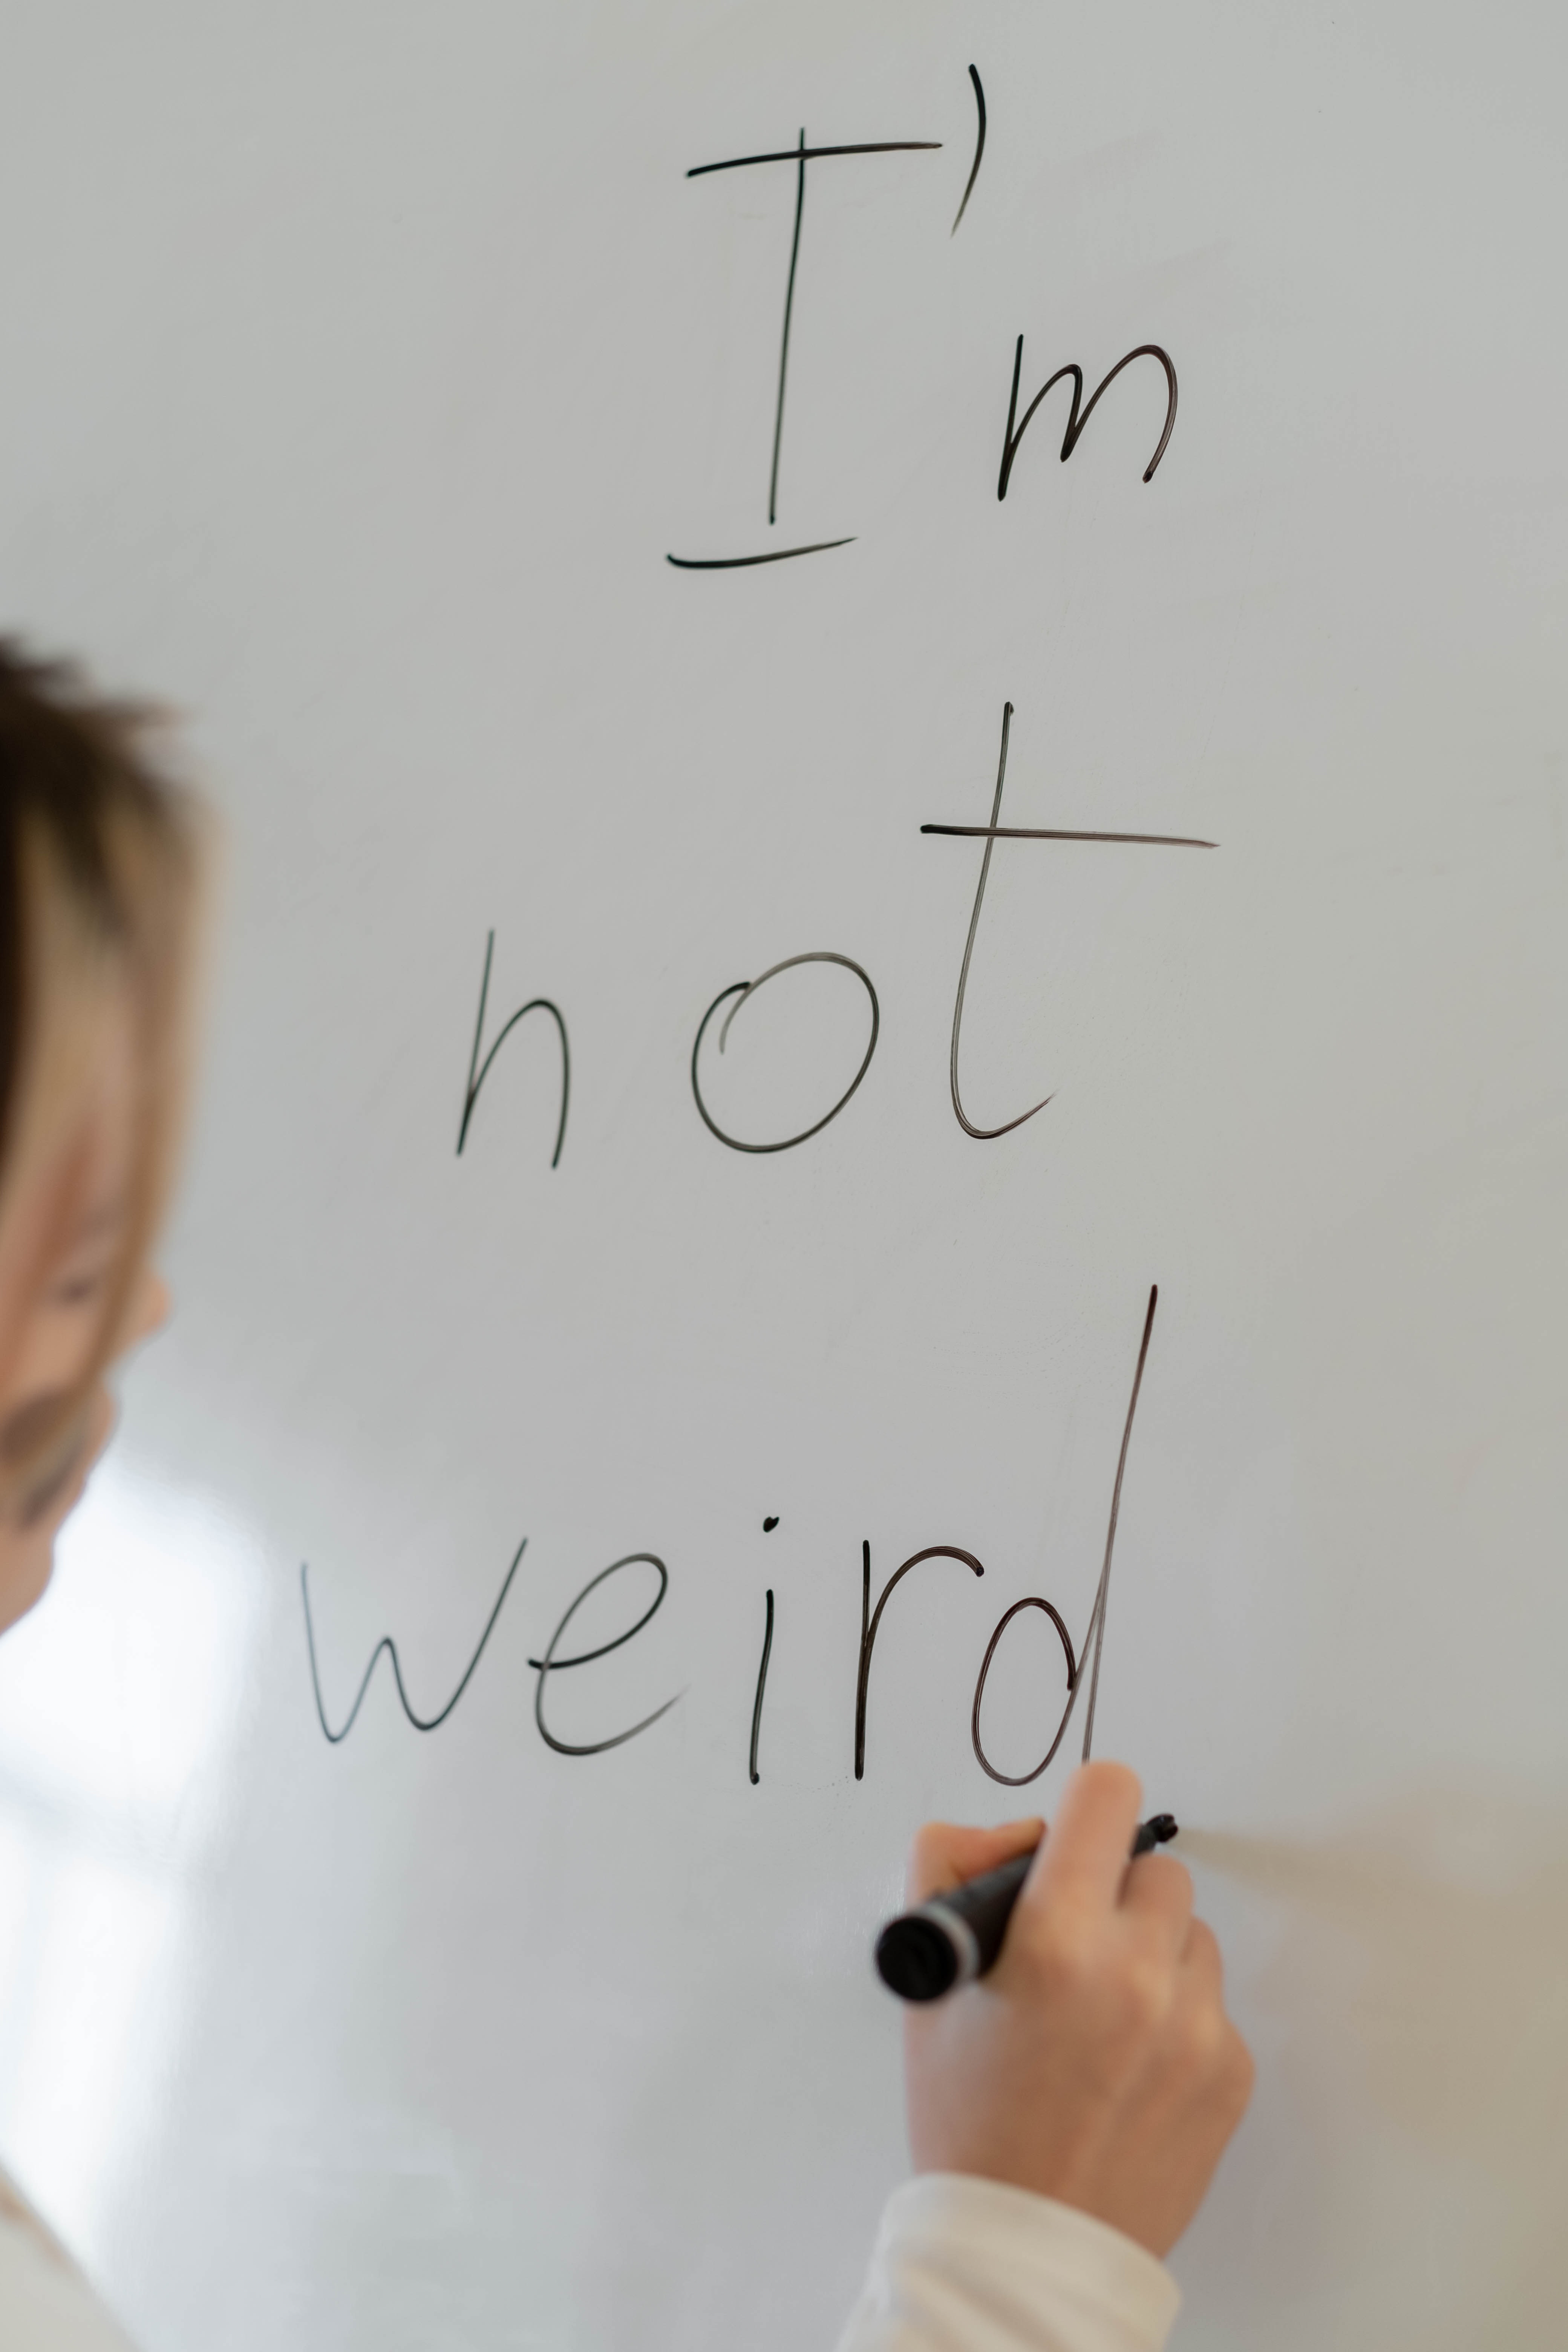 Weird people photos download the best free weird people stock photos hd images